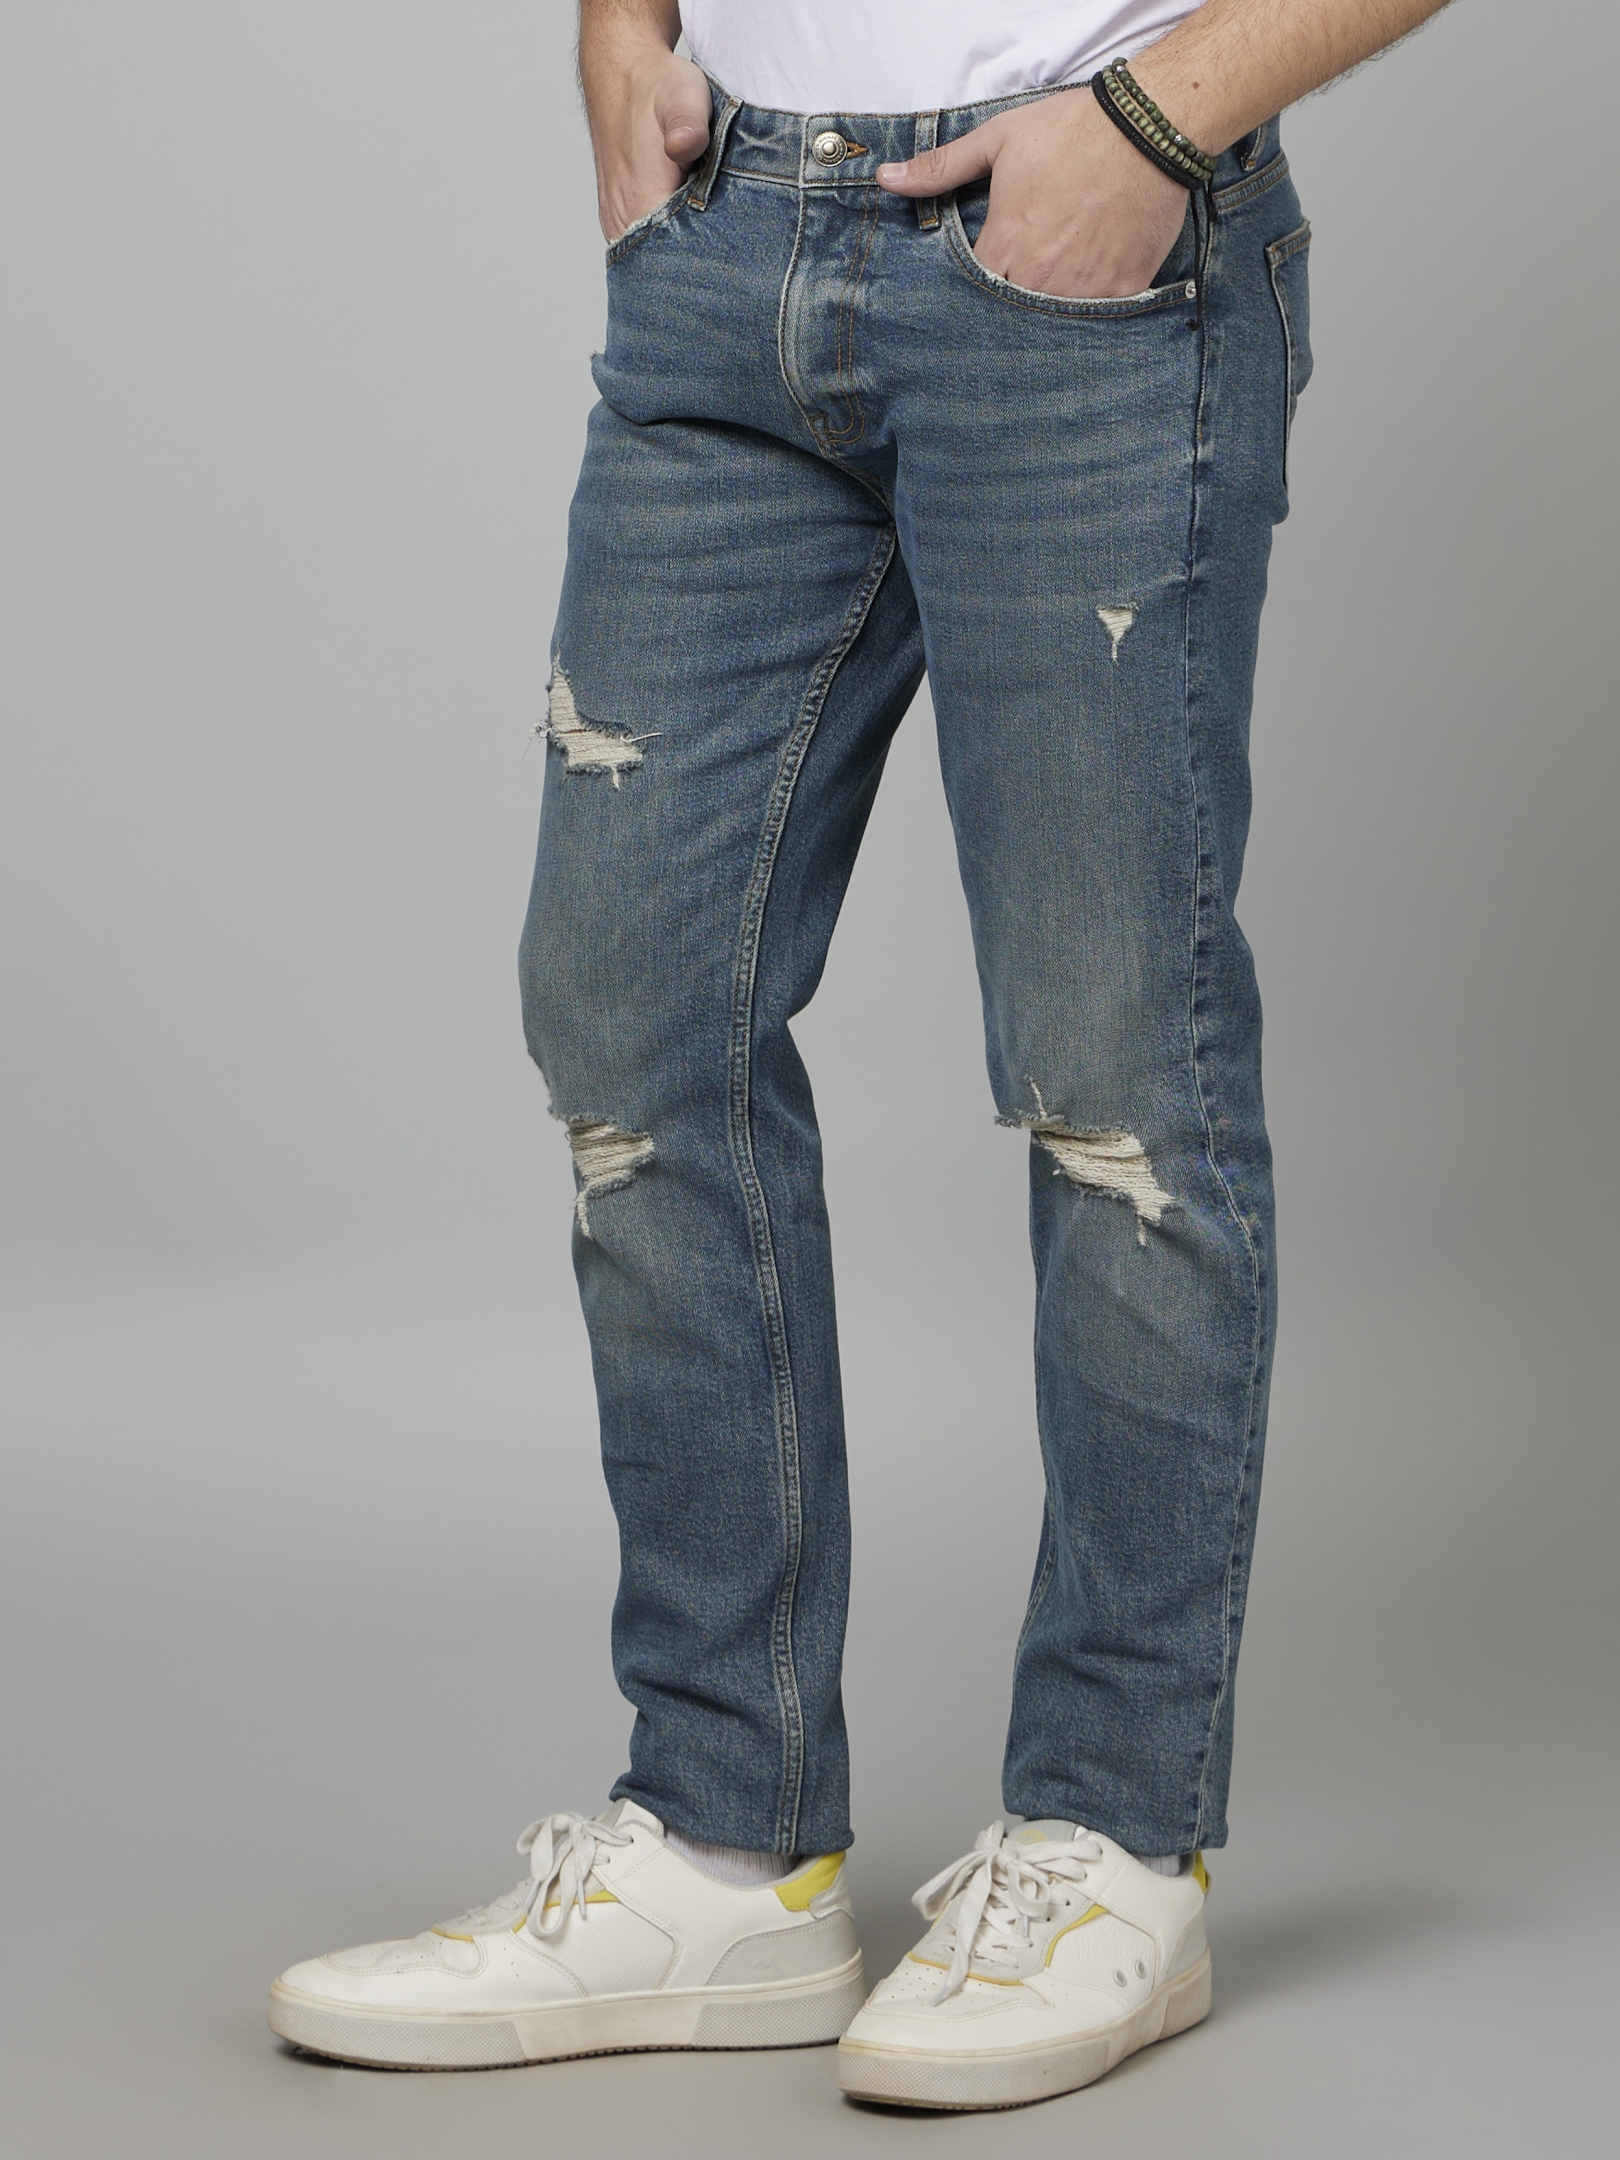 Men's Blue Cotton Blend Solid Ripped Jeans